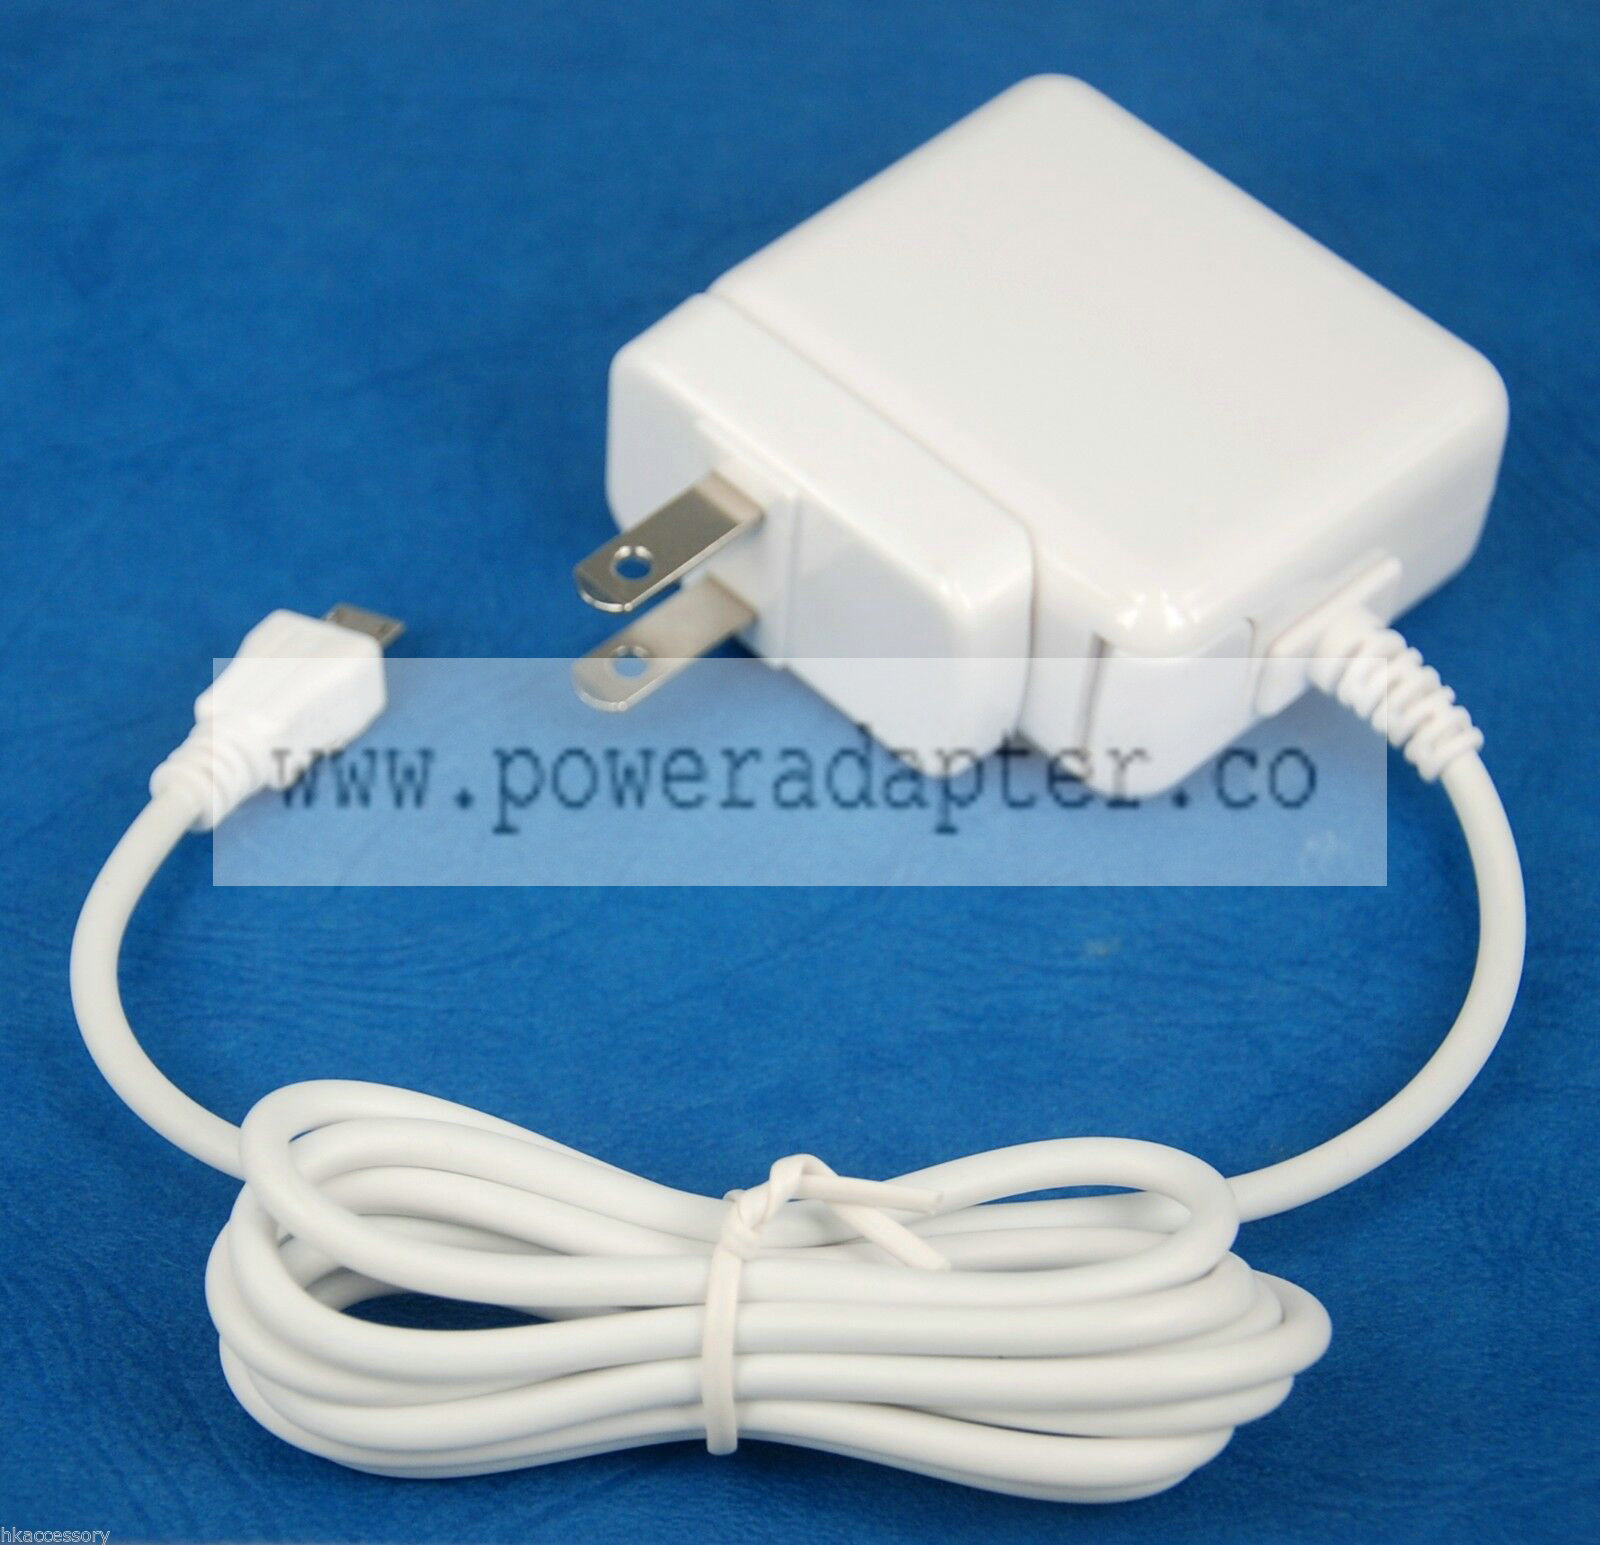 5V 2A AC Adapter Wall Charger US Plug WHITE for Motorola Moto G X Droid Razr M Type: Wall Charger MPN: TC-P12(UL) wh